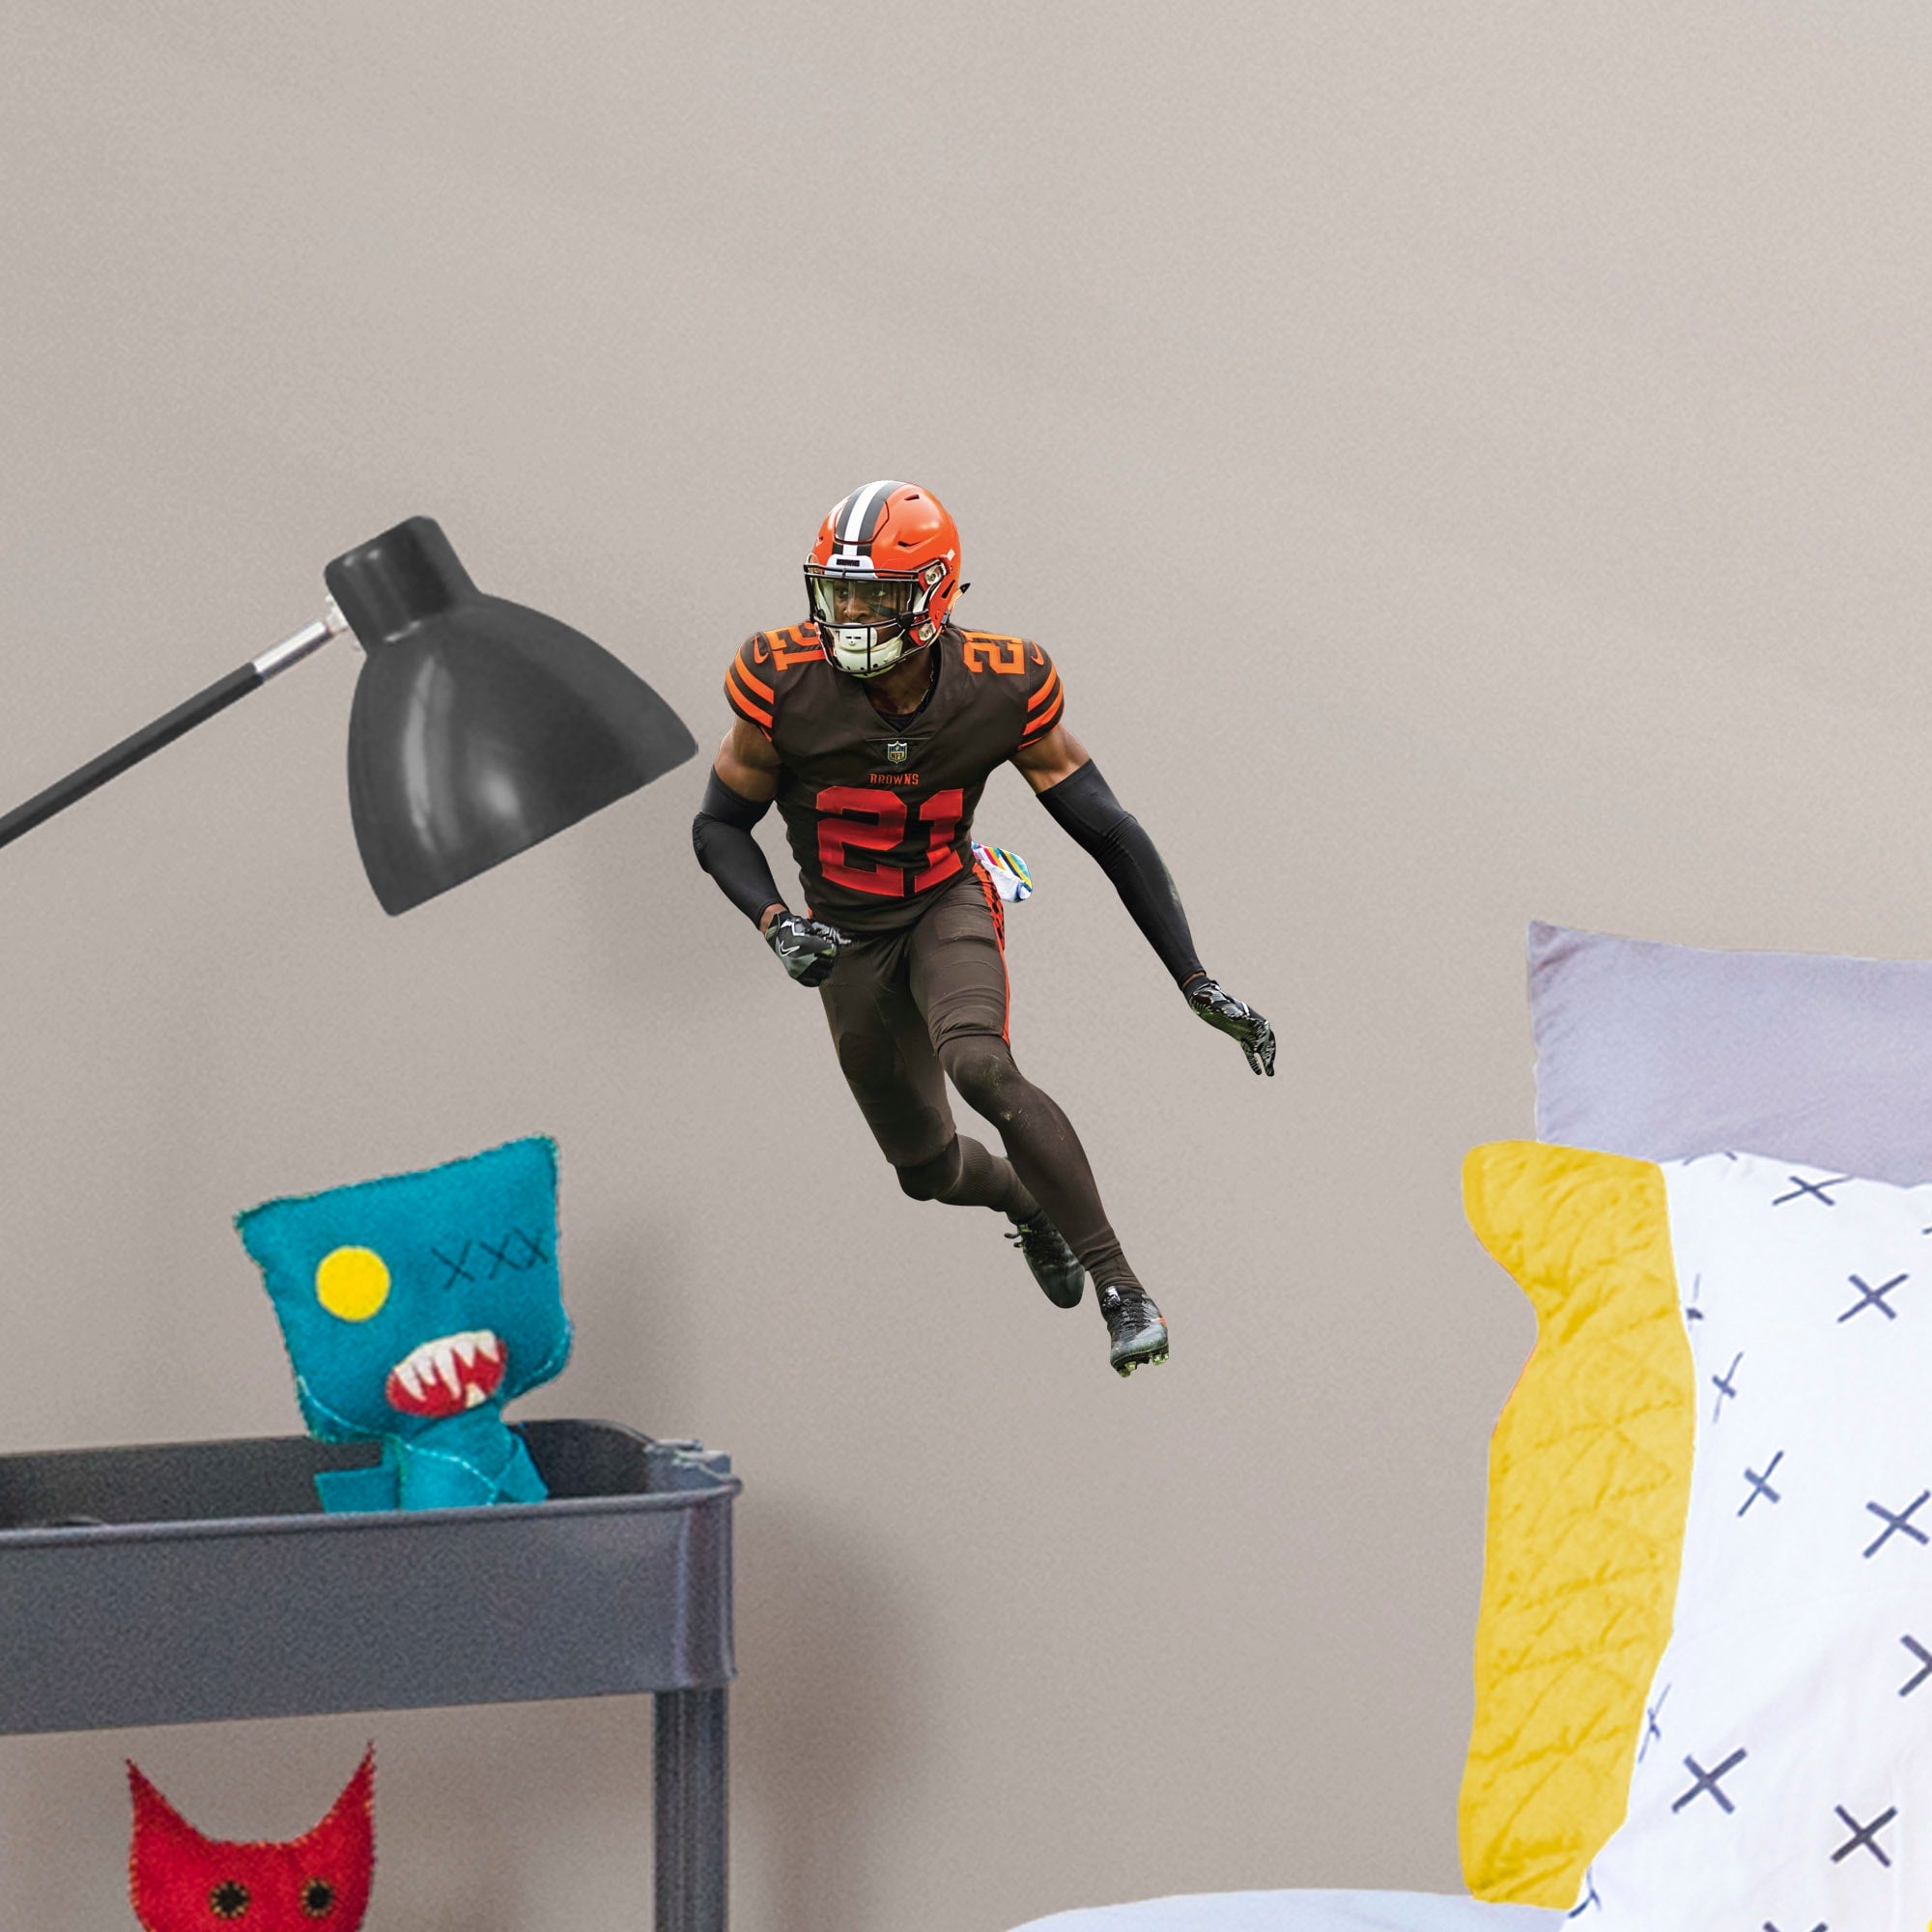 Denzel Ward for Cleveland Browns - Officially Licensed NFL Removable Wall Decal Large by Fathead | Vinyl